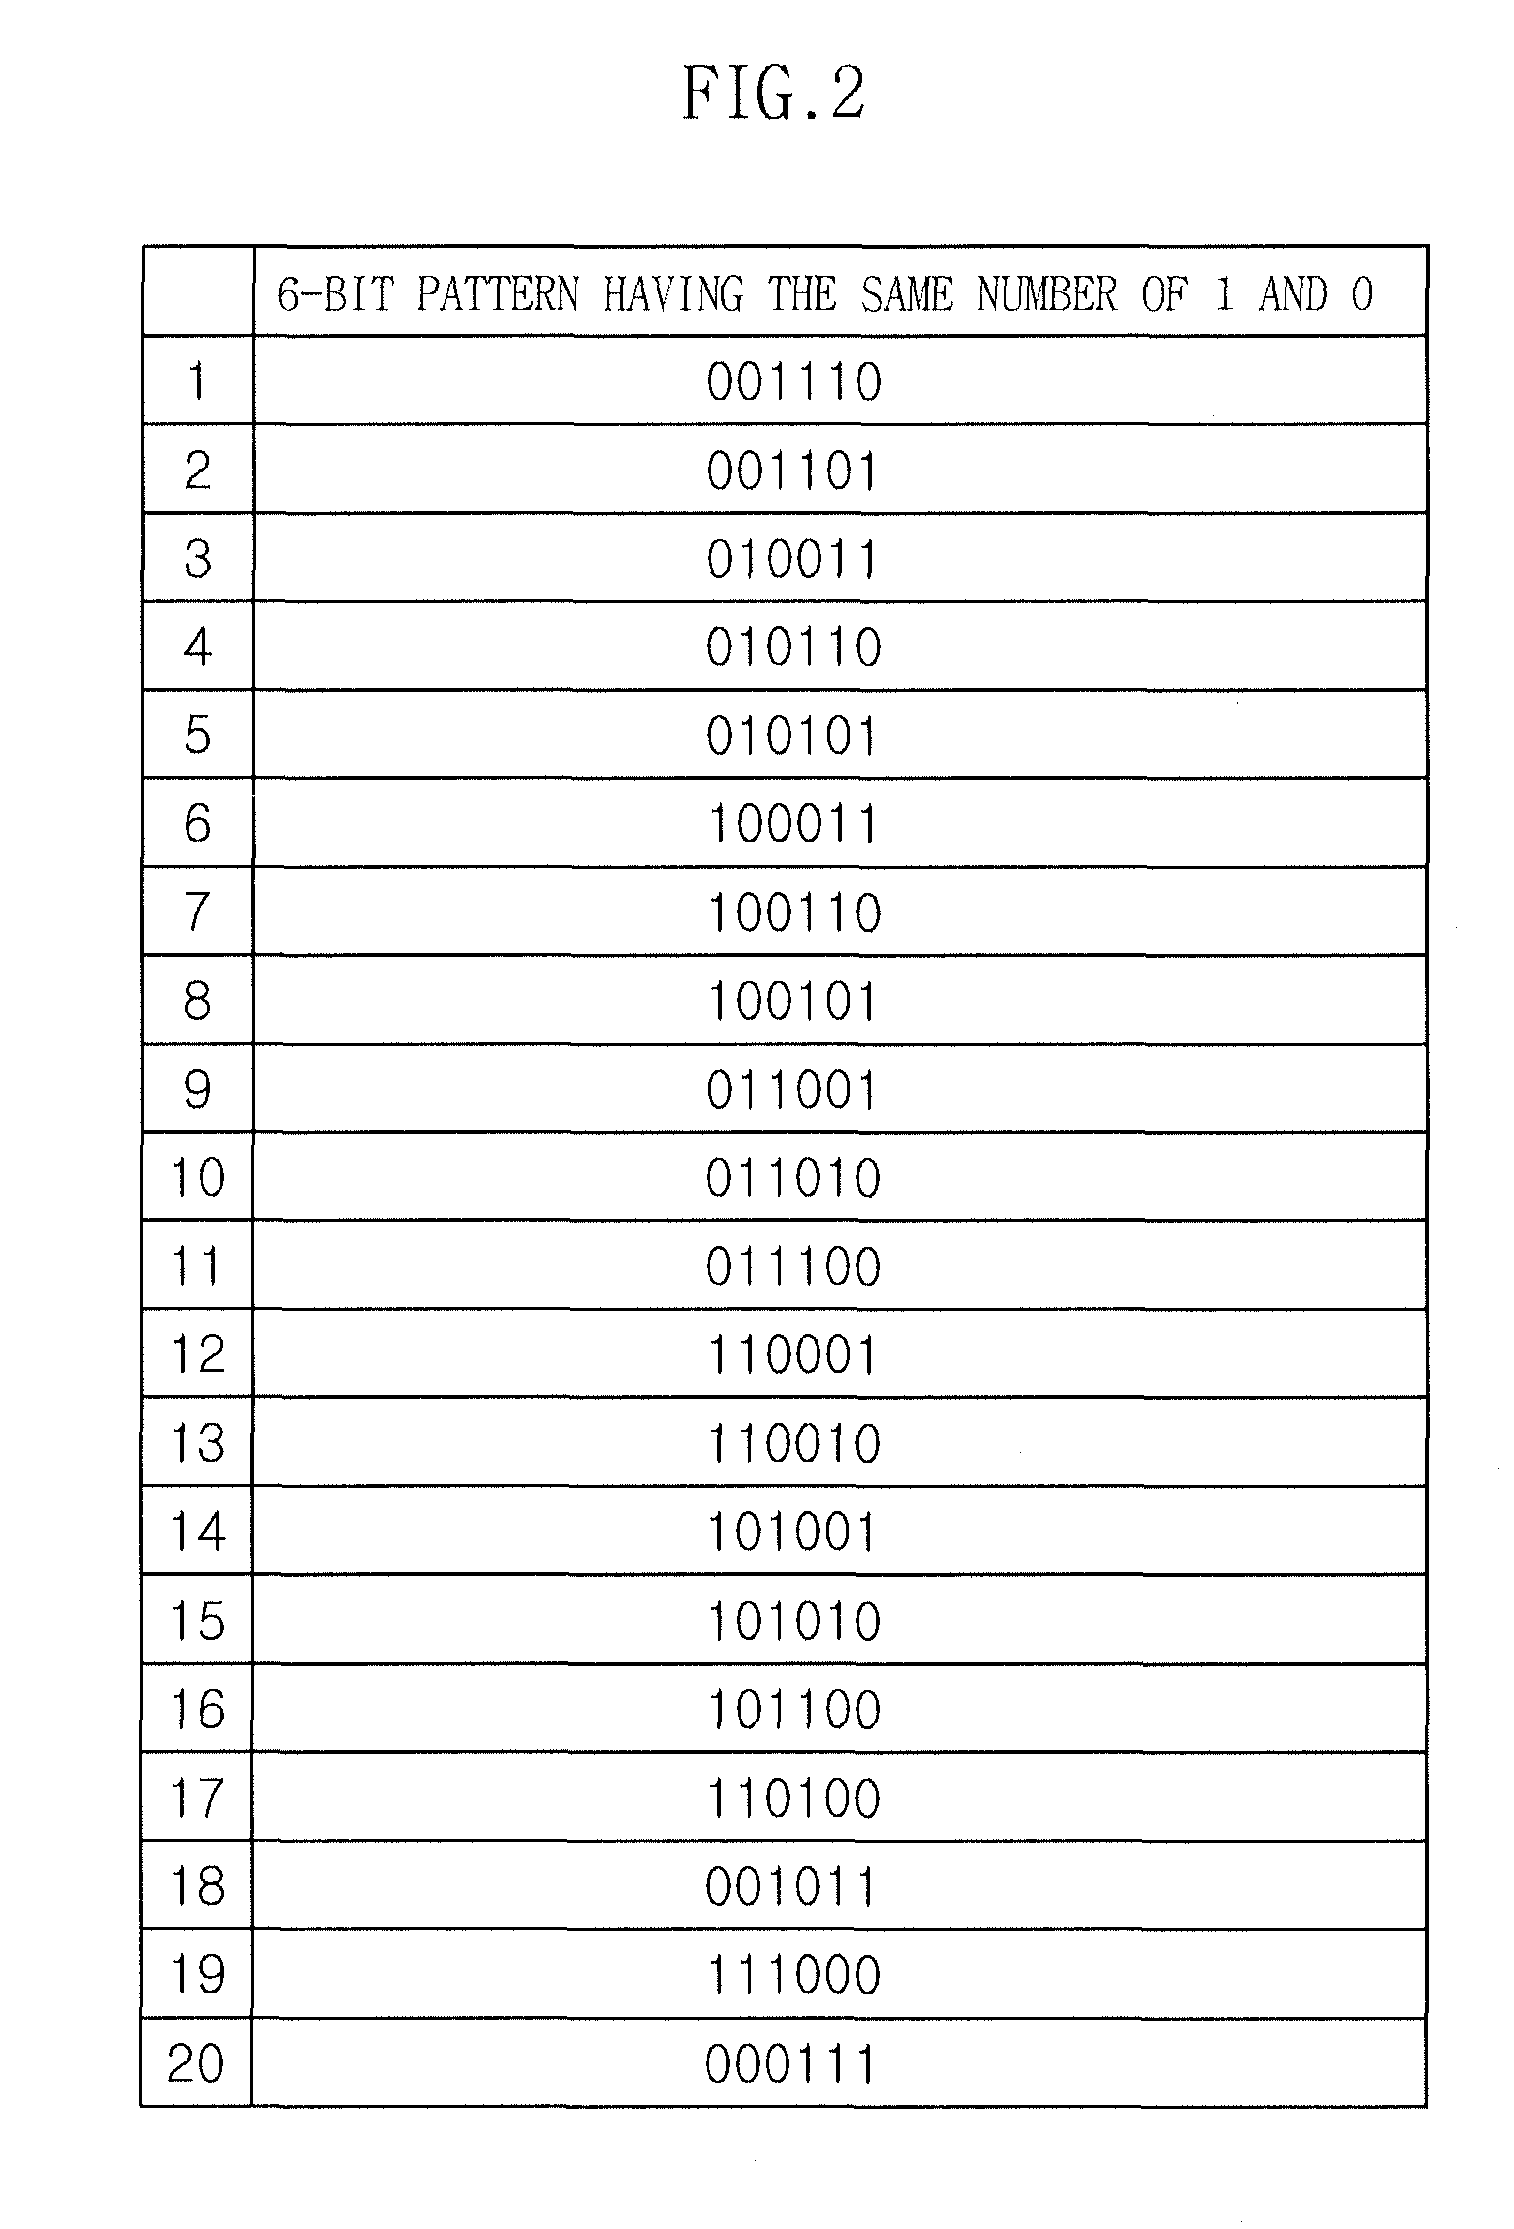 Transmitter, receiver for visible light communication and method using the same